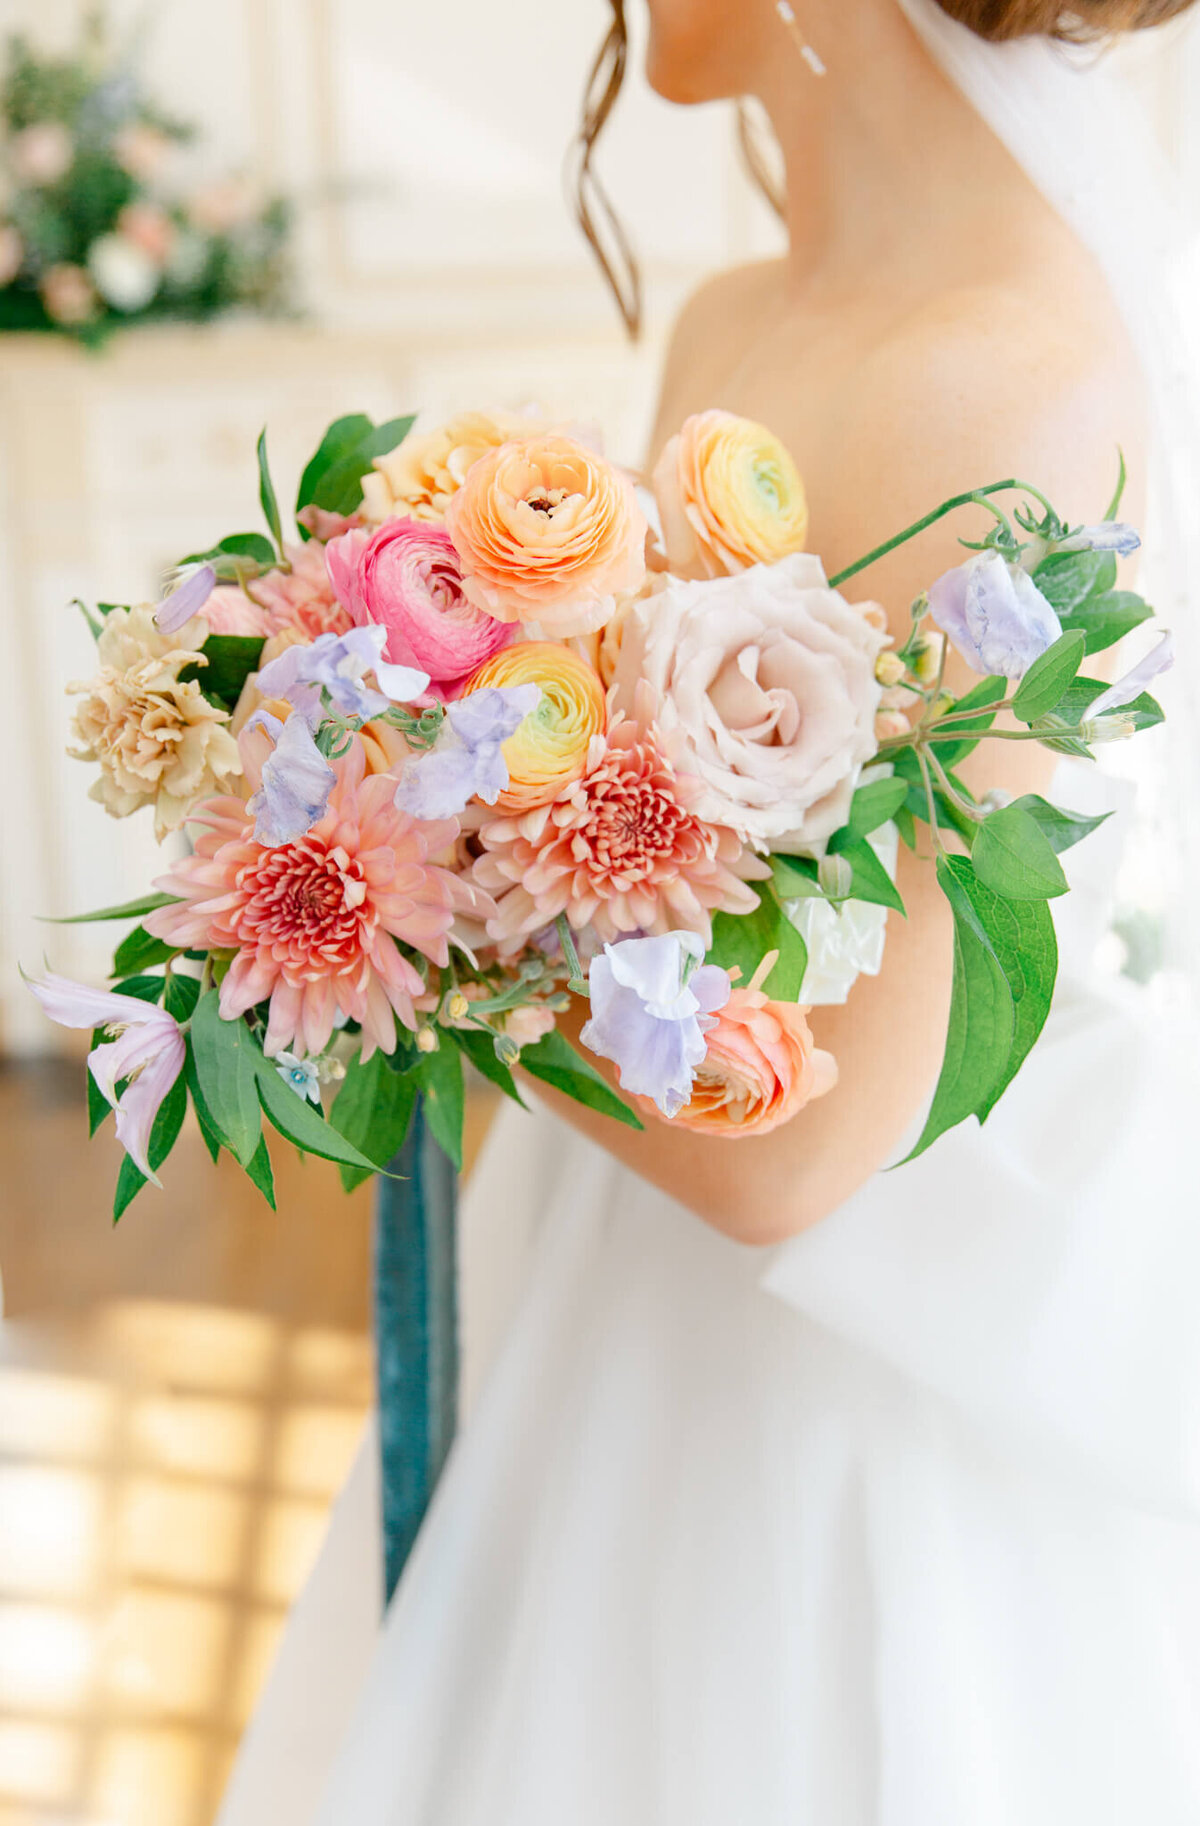 Bride holding colorful bouquet during bridal portraits at The Estate at River Run in Maidens, Virginia. Captured by Charlottesville Wedding Photographer Bethany Aubre Photography.